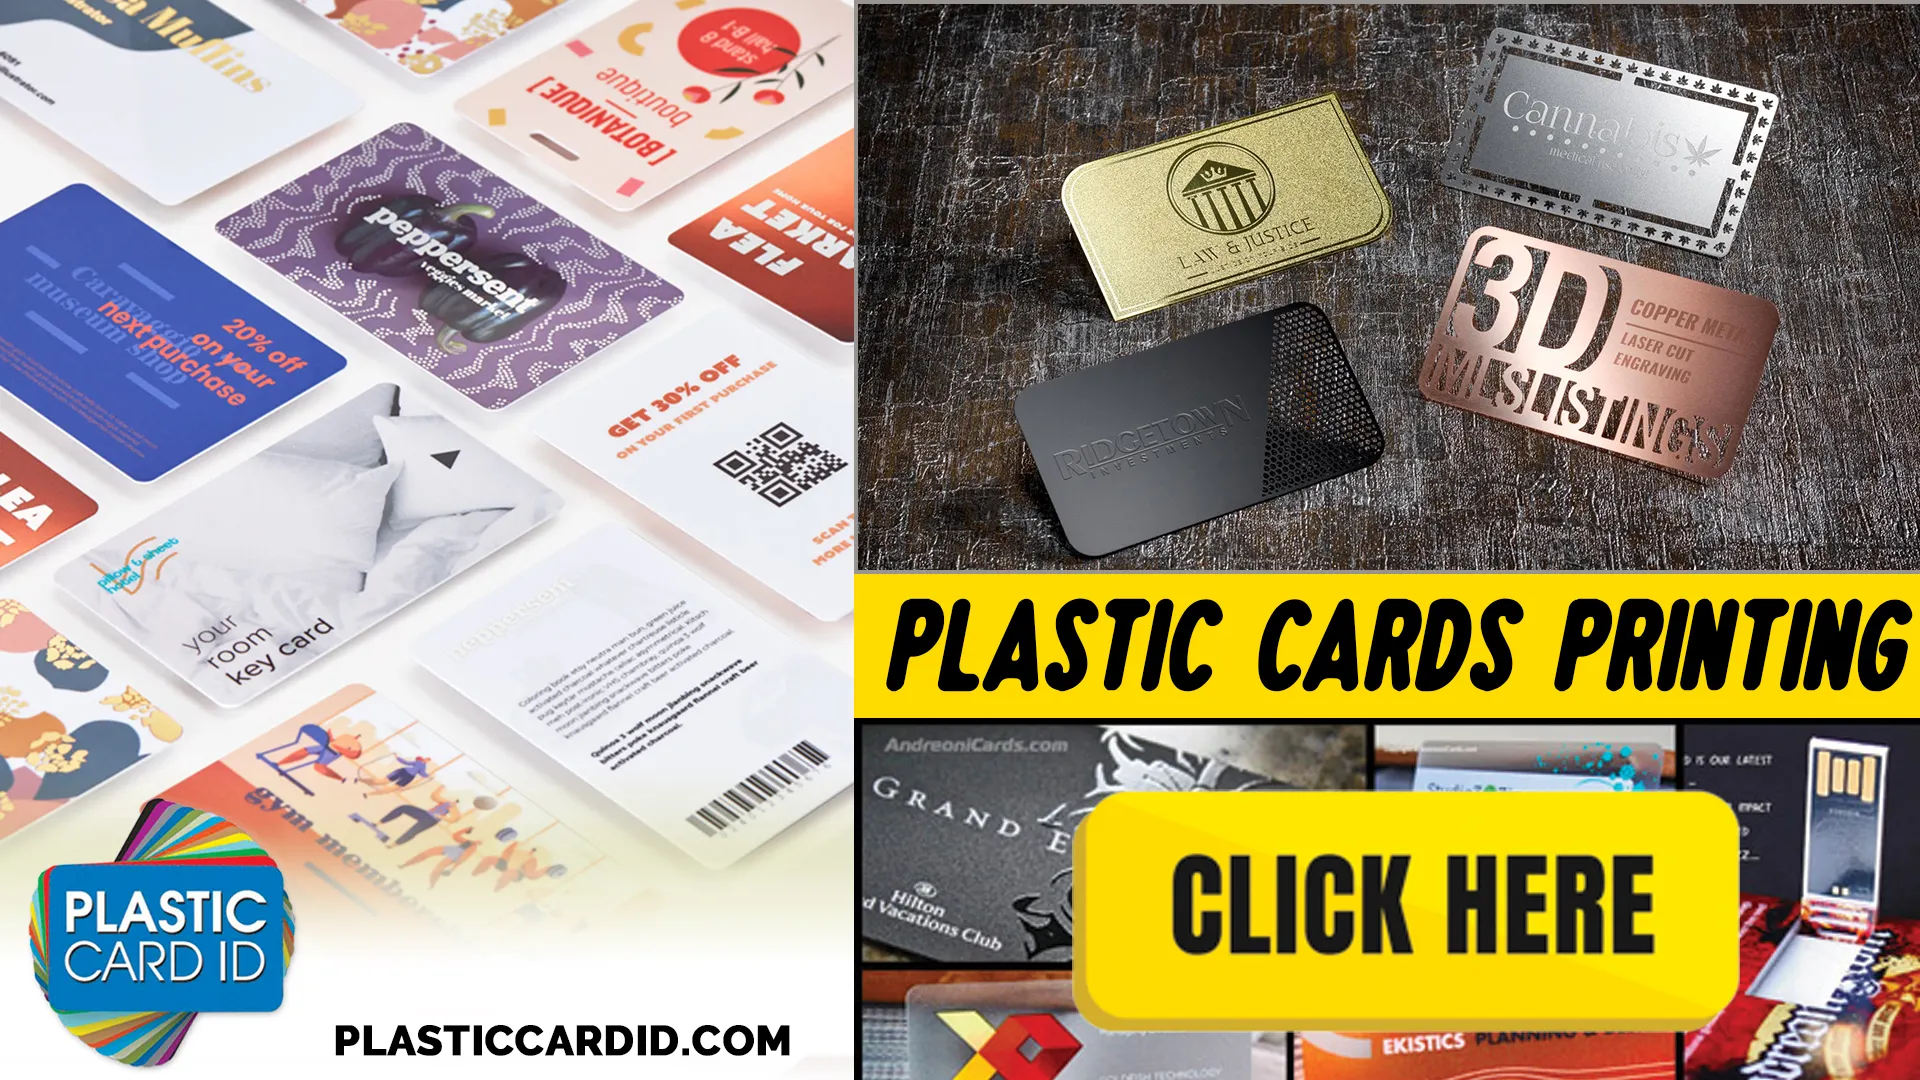 Measurable Success with Plastic Card ID
